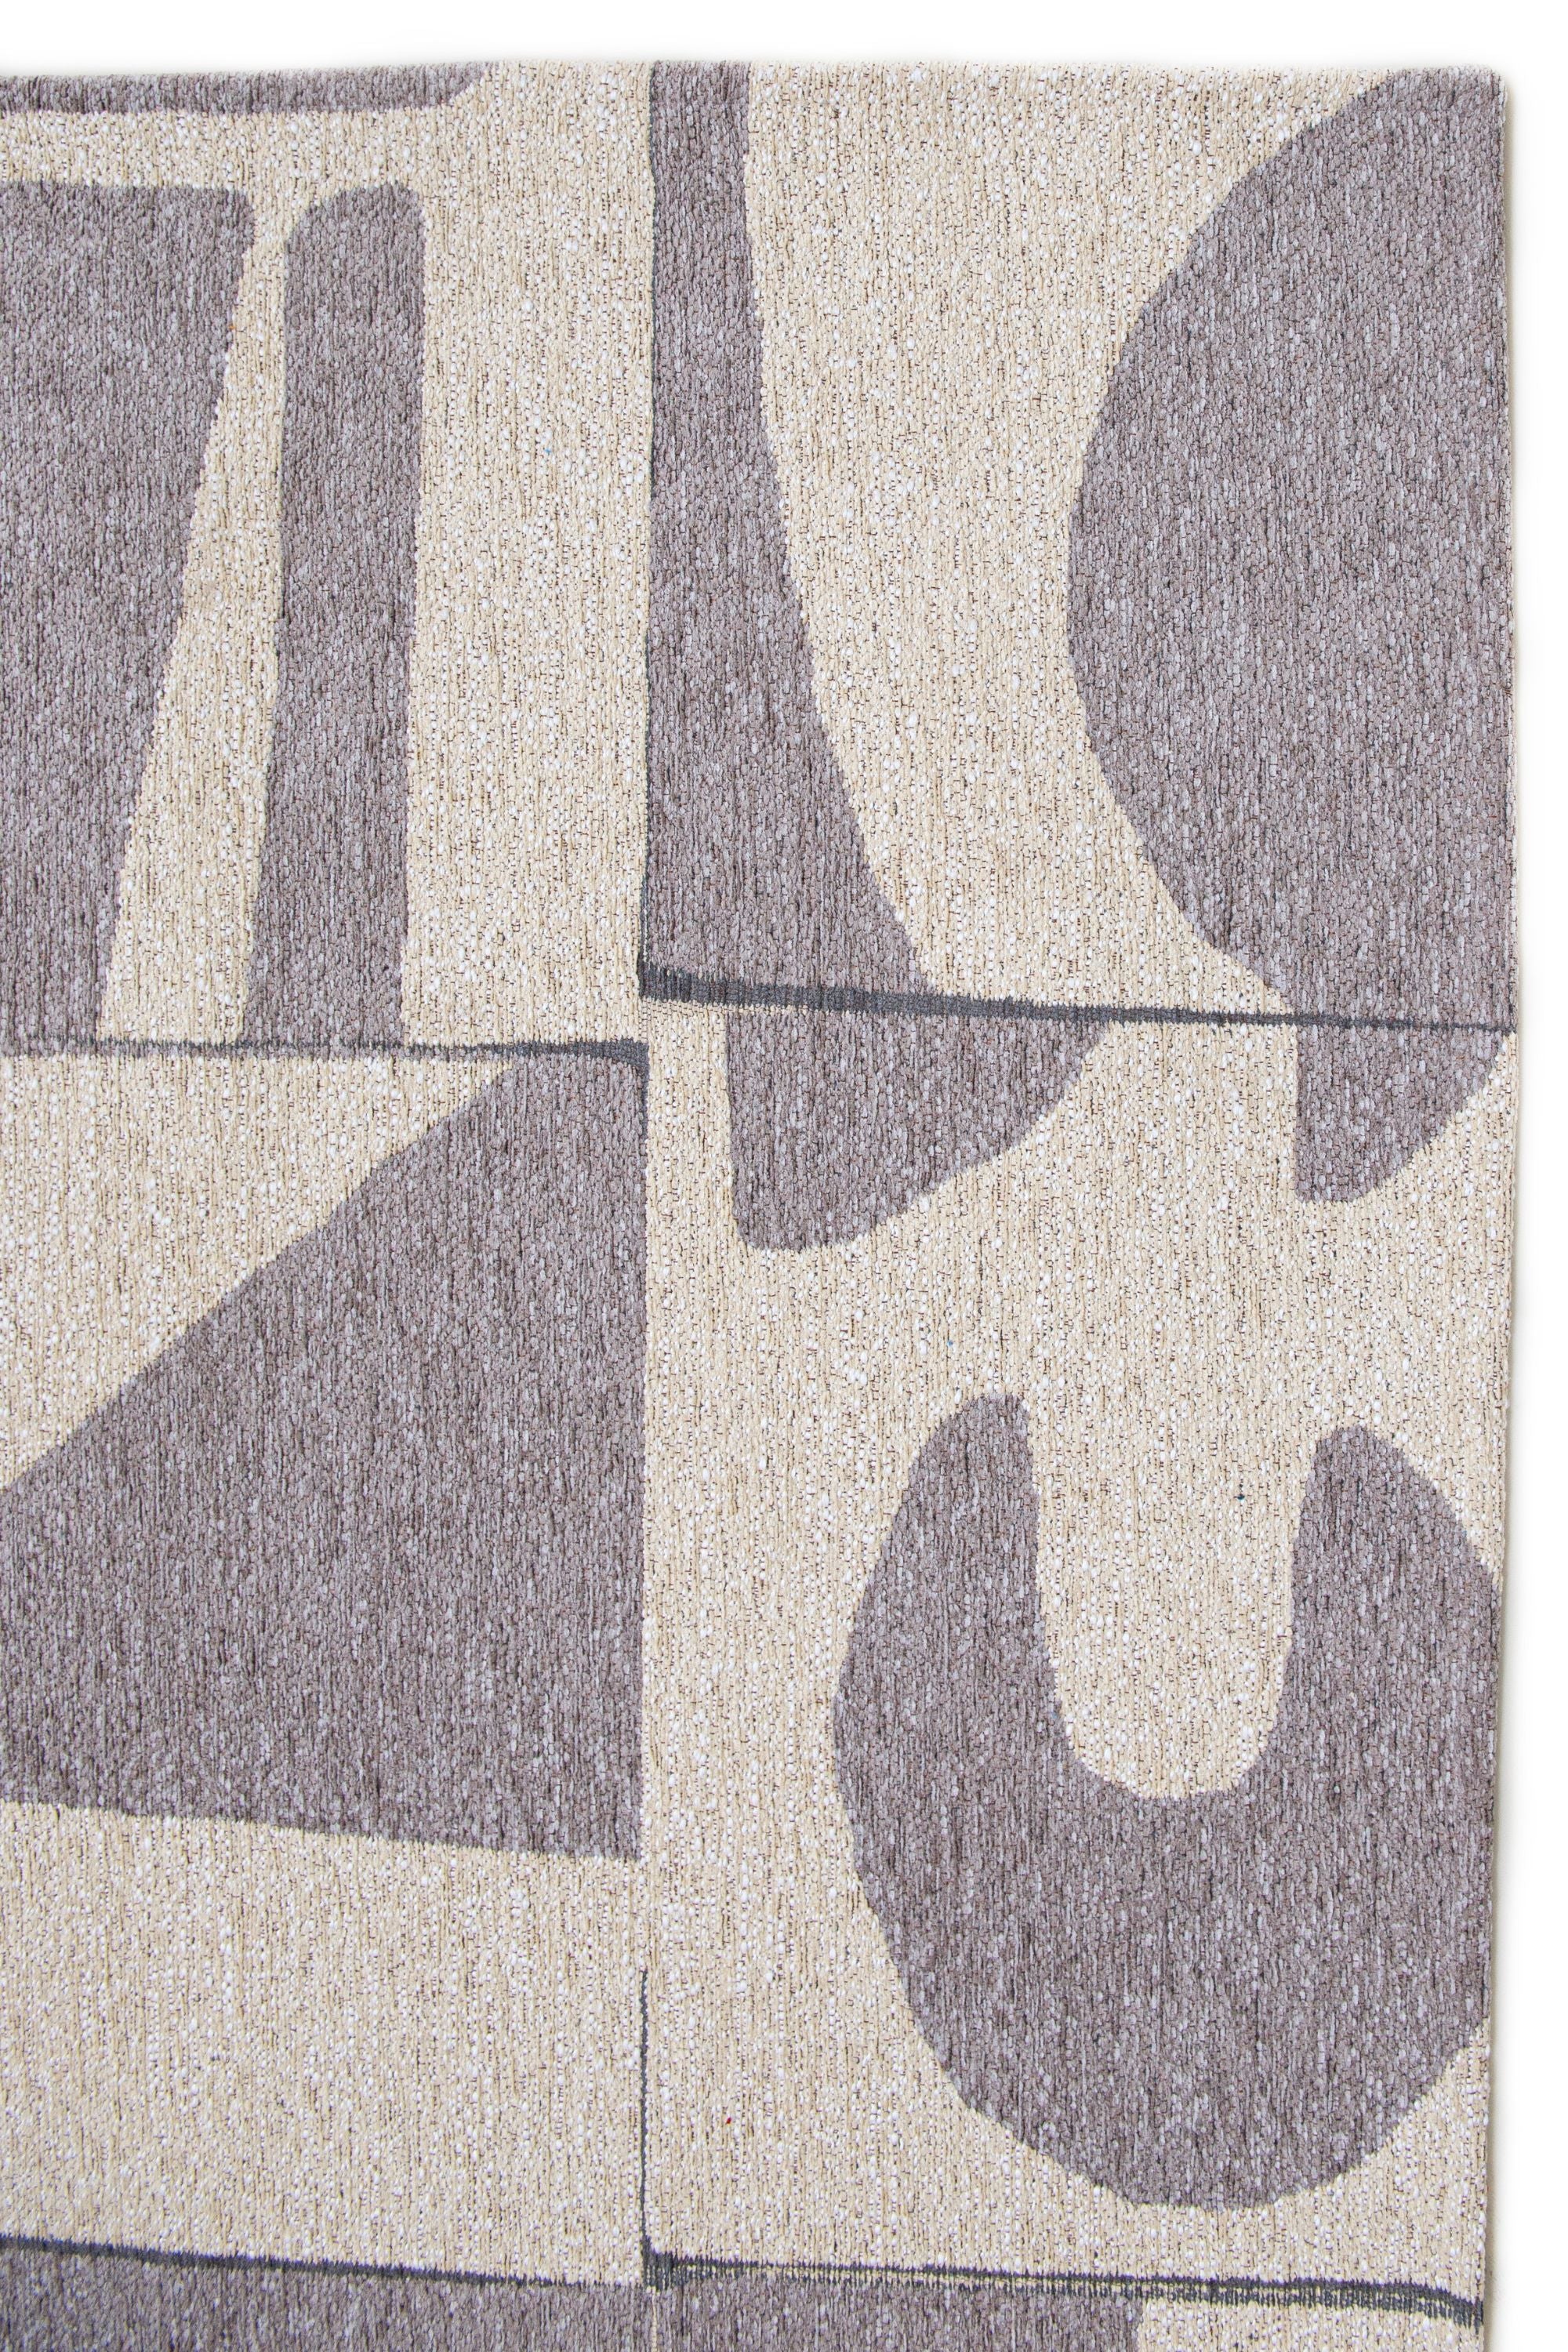 Modern abstract runner rug with grey patchwork pattern